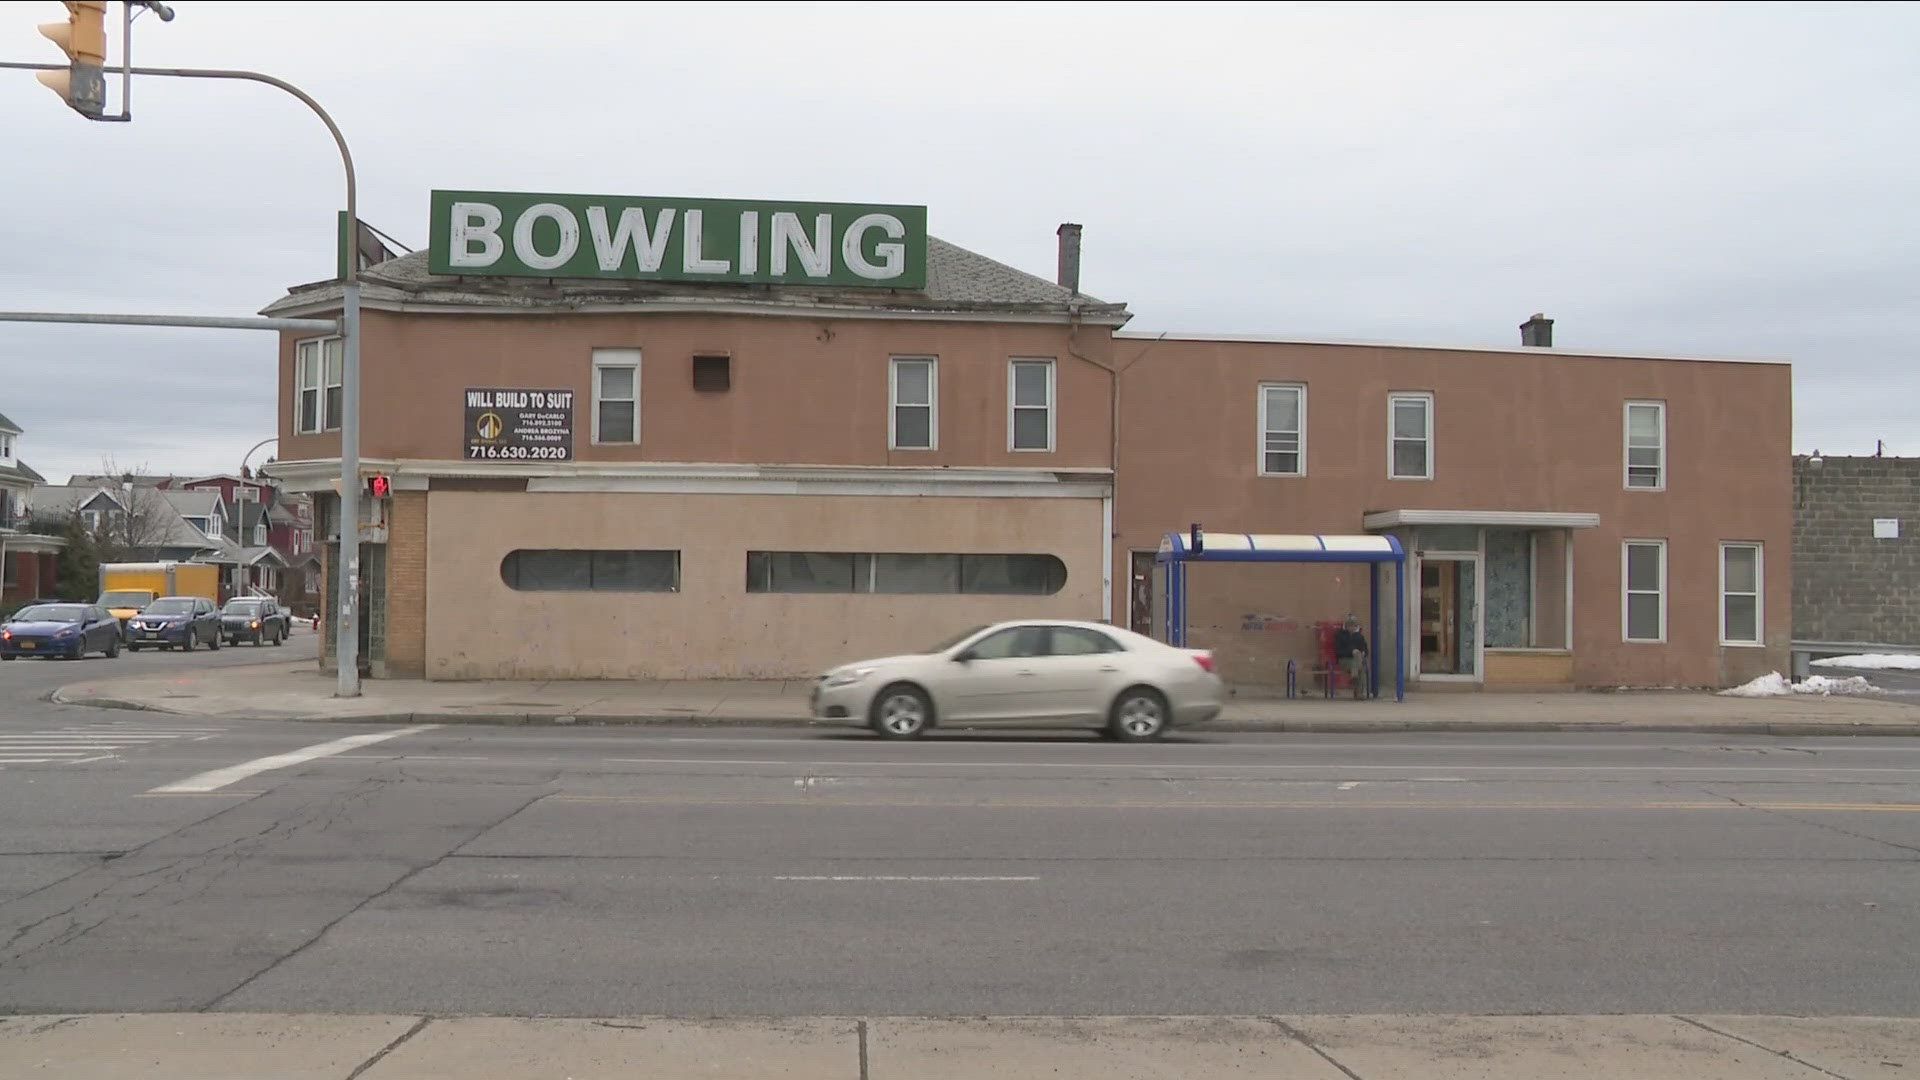 Developer has plans for former Buffalo bowling alley